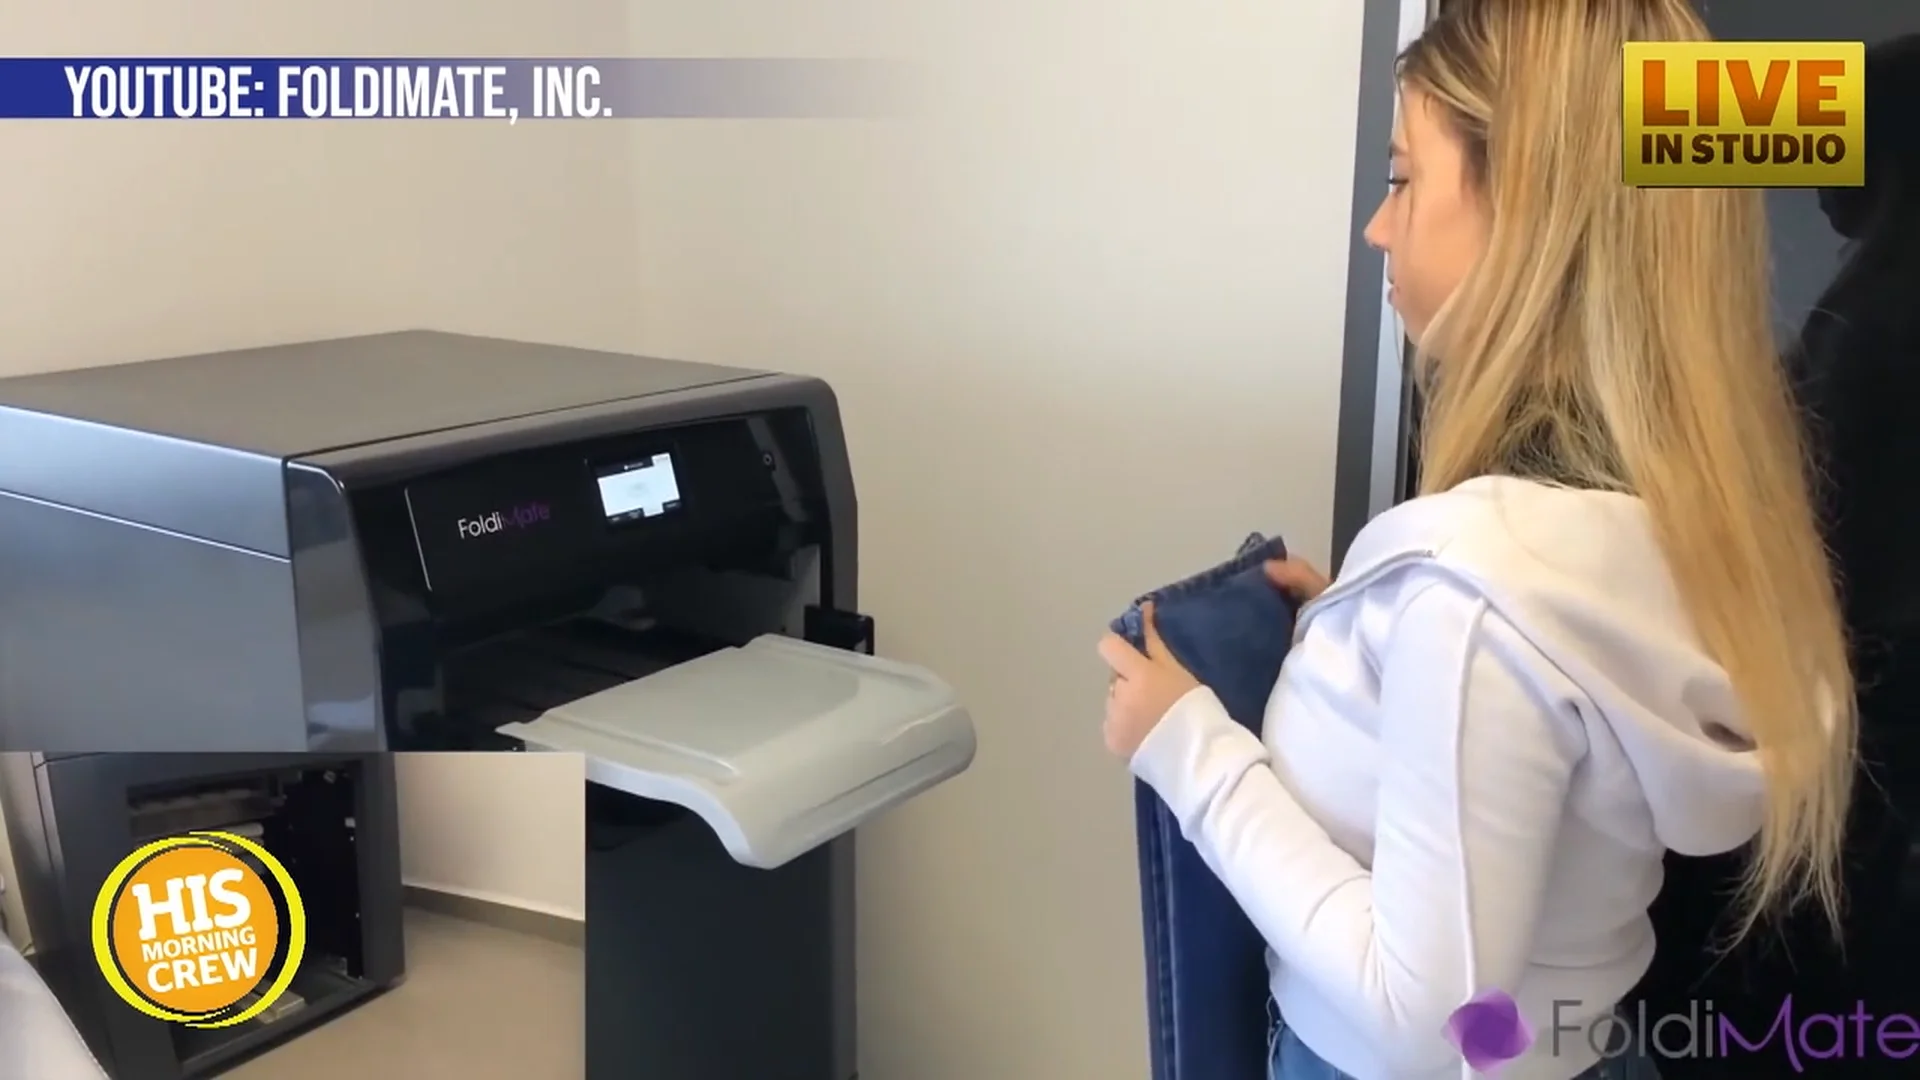 Foldimate Invention Folds Your Laundry So You Don't Have To on Vimeo